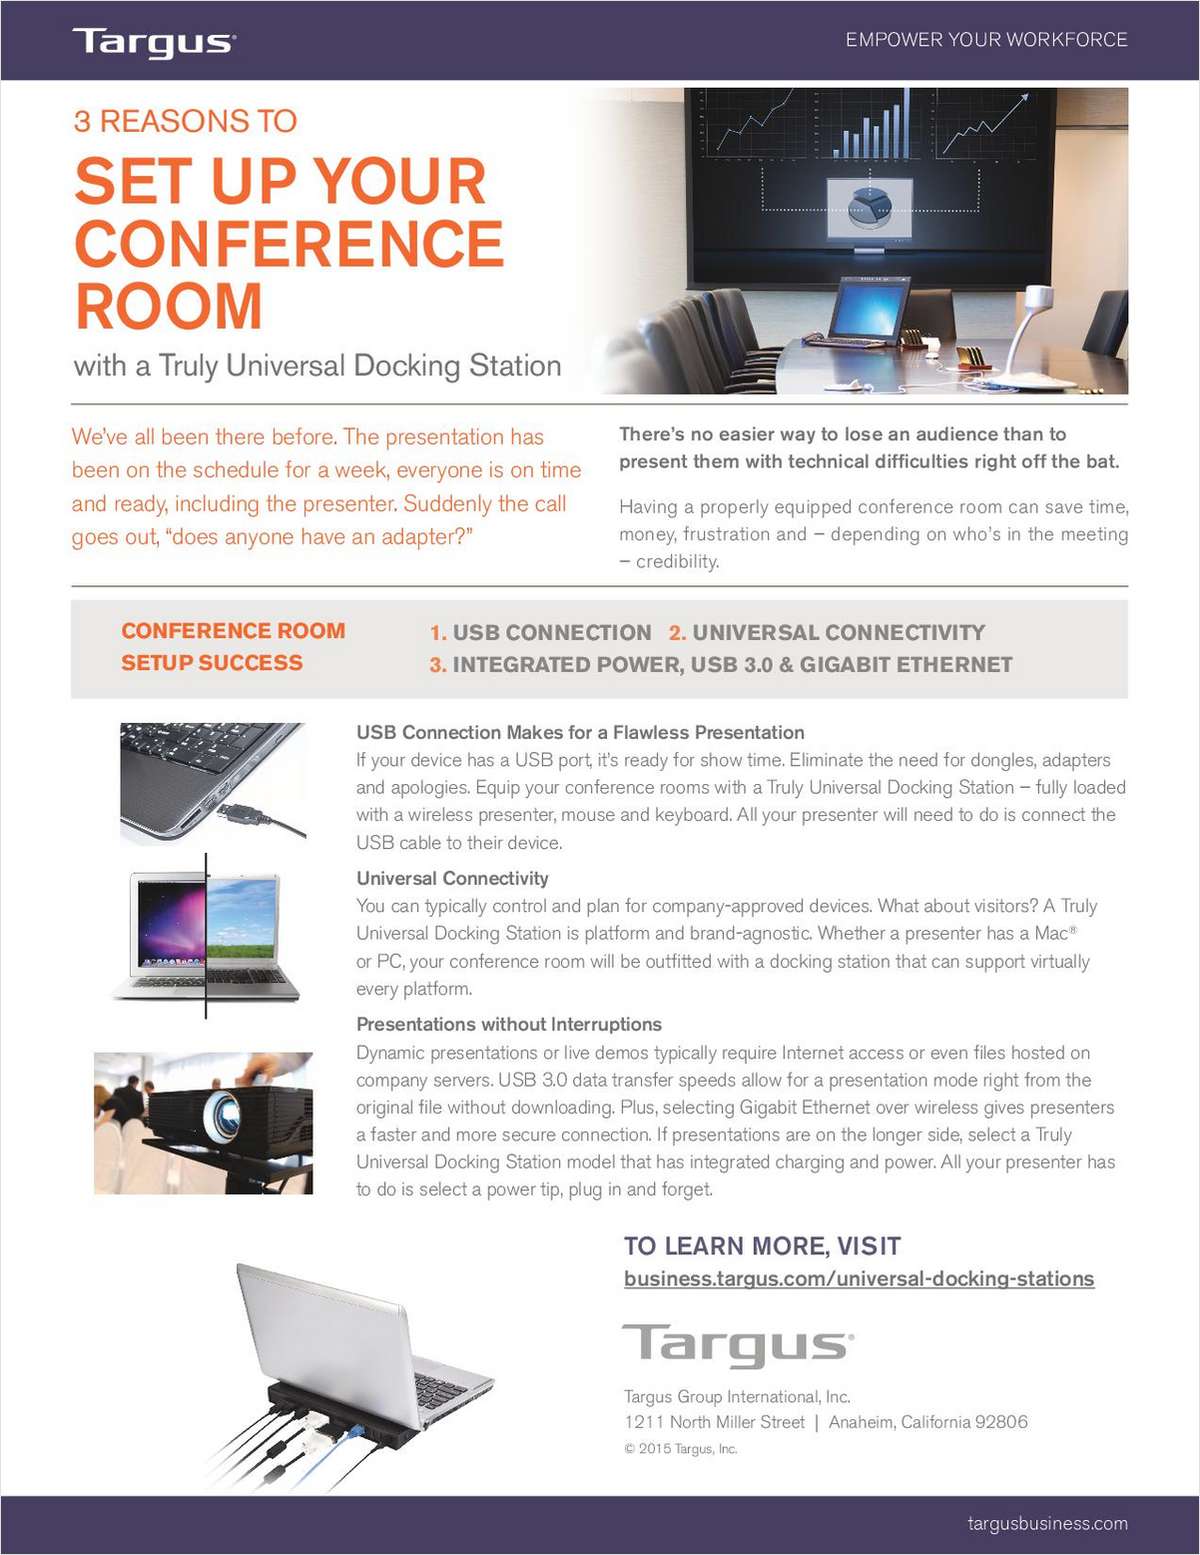 3 Reasons to Set Up Your Conference Room With a Truly Universal Docking Station